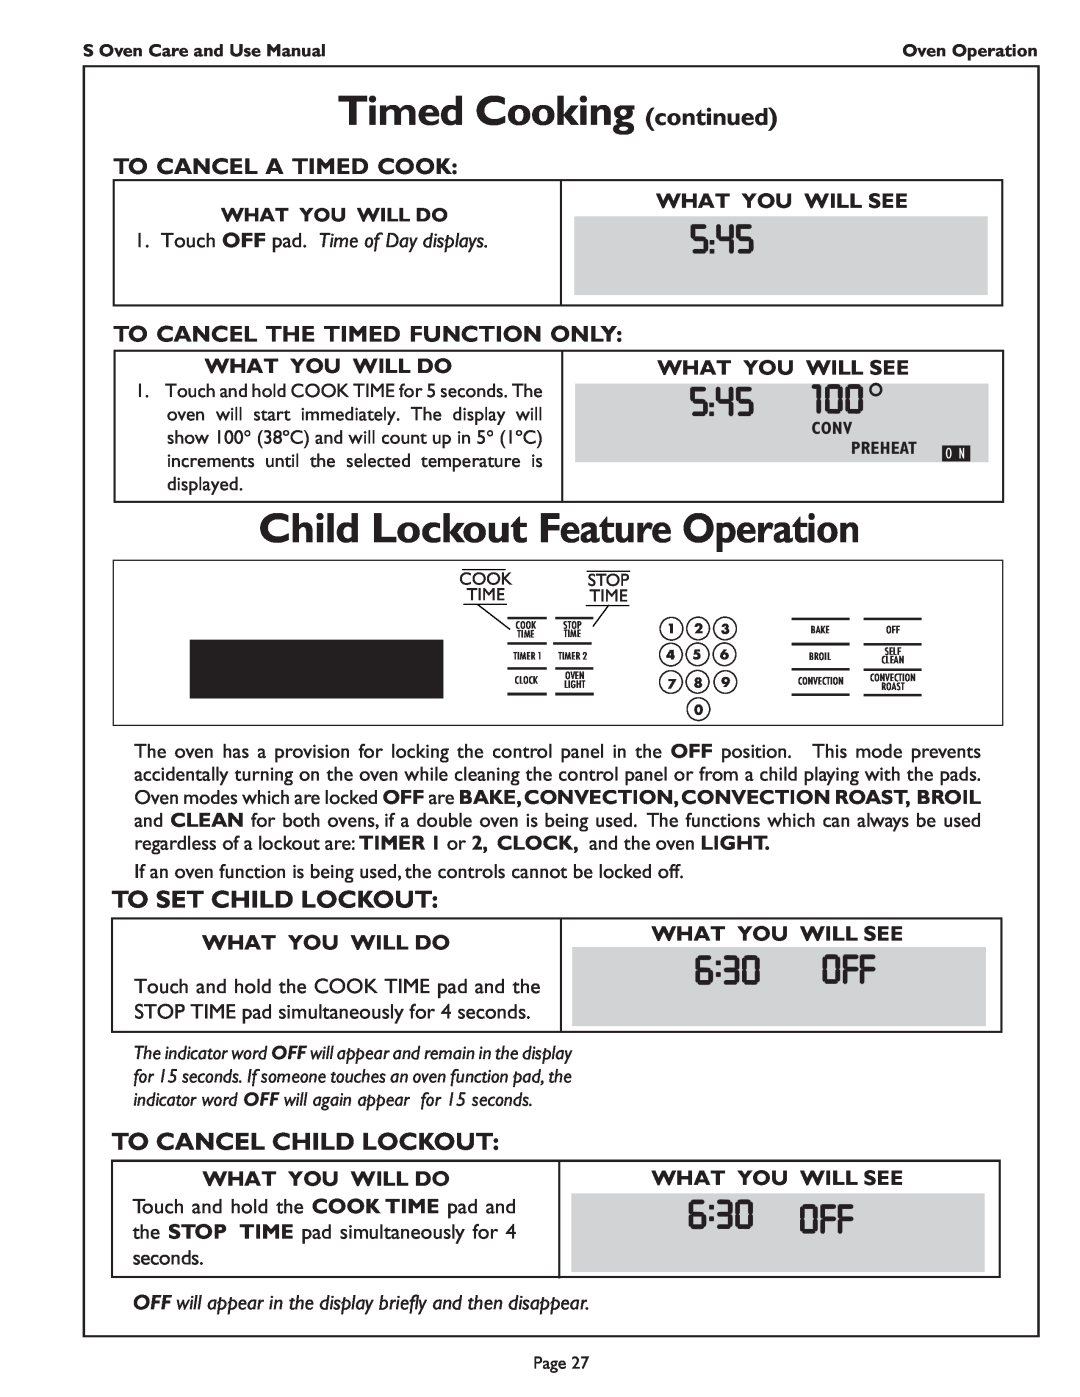 Thermador SCD272, SC301, SC272 Child Lockout Feature Operation, 6 30 OFF, To Set Child Lockout, To Cancel Child Lockout 